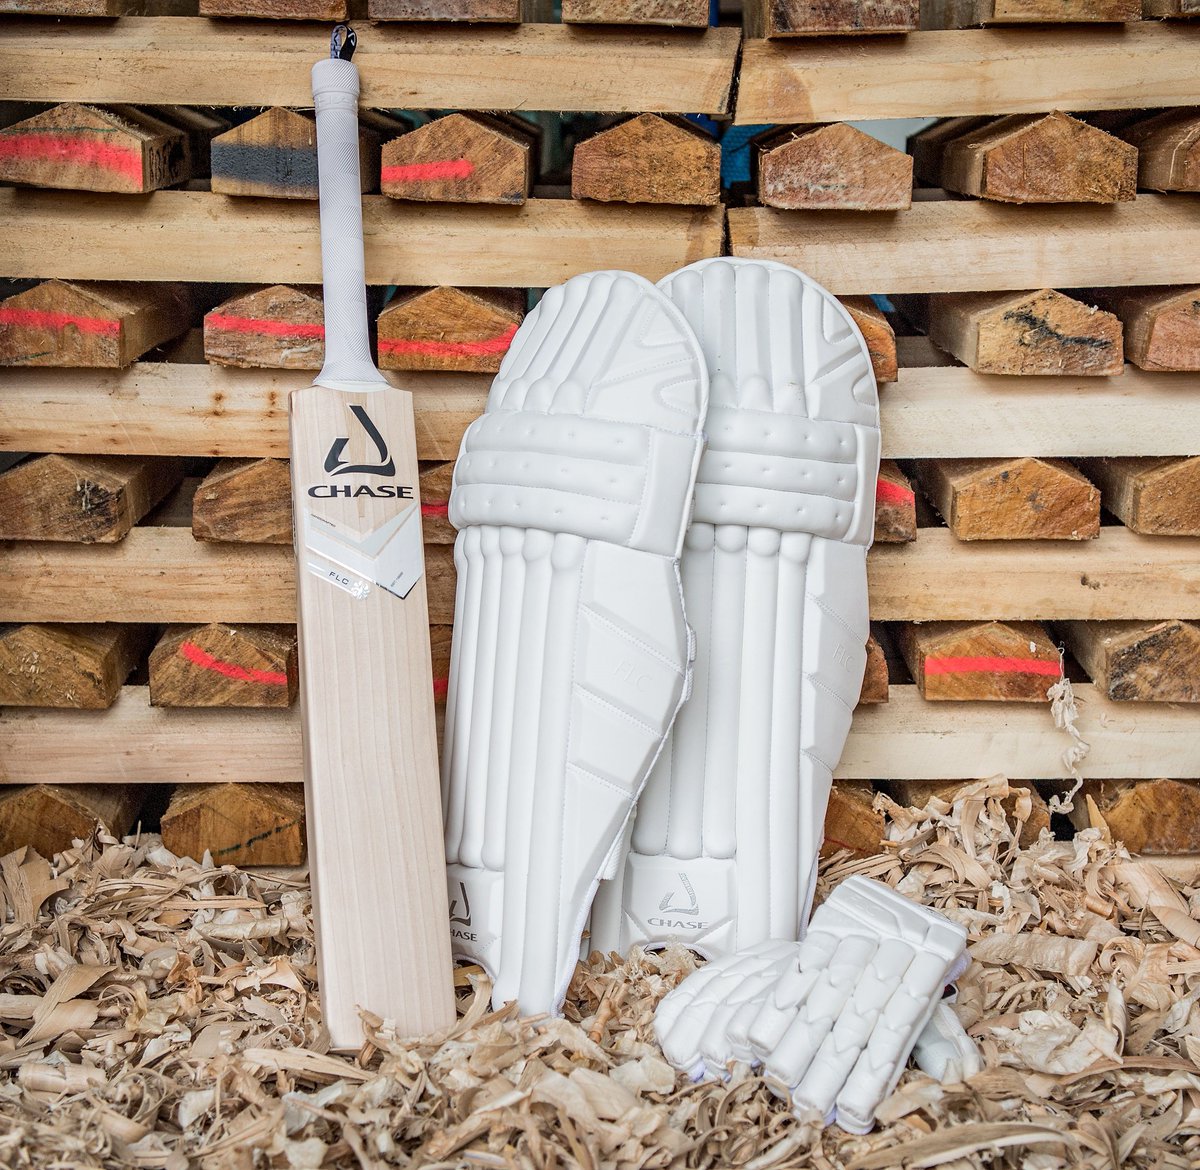 The FLC Collection 🍀Each piece is meticulously designed, crafted with precision and dedication to enhance your performance on the field. Gear up for 2024 with #chasecricket 🔥 #cricket #cricketkit #cricketgear #chaseflc #cricketkit #flccollection #cricketerschoice #cricketlife